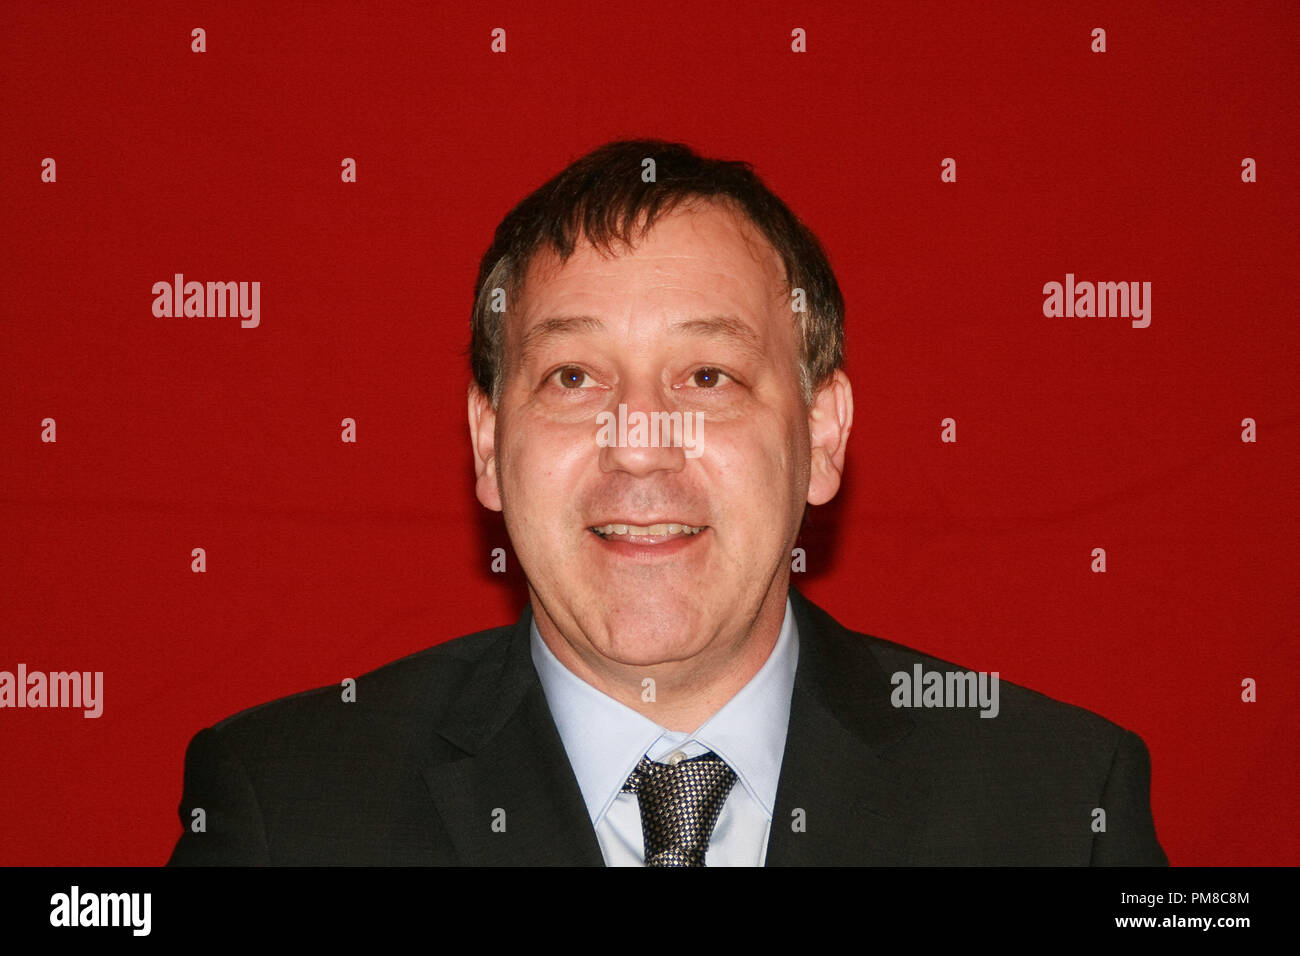 Sam Raimi Portrait 'OZ the Great and Powerful' Portrait Session, February 15, 2013.  Reproduction by American tabloids is absolutely forbidden. File Reference # 31843 037JRC  For Editorial Use Only -  All Rights Reserved Stock Photo